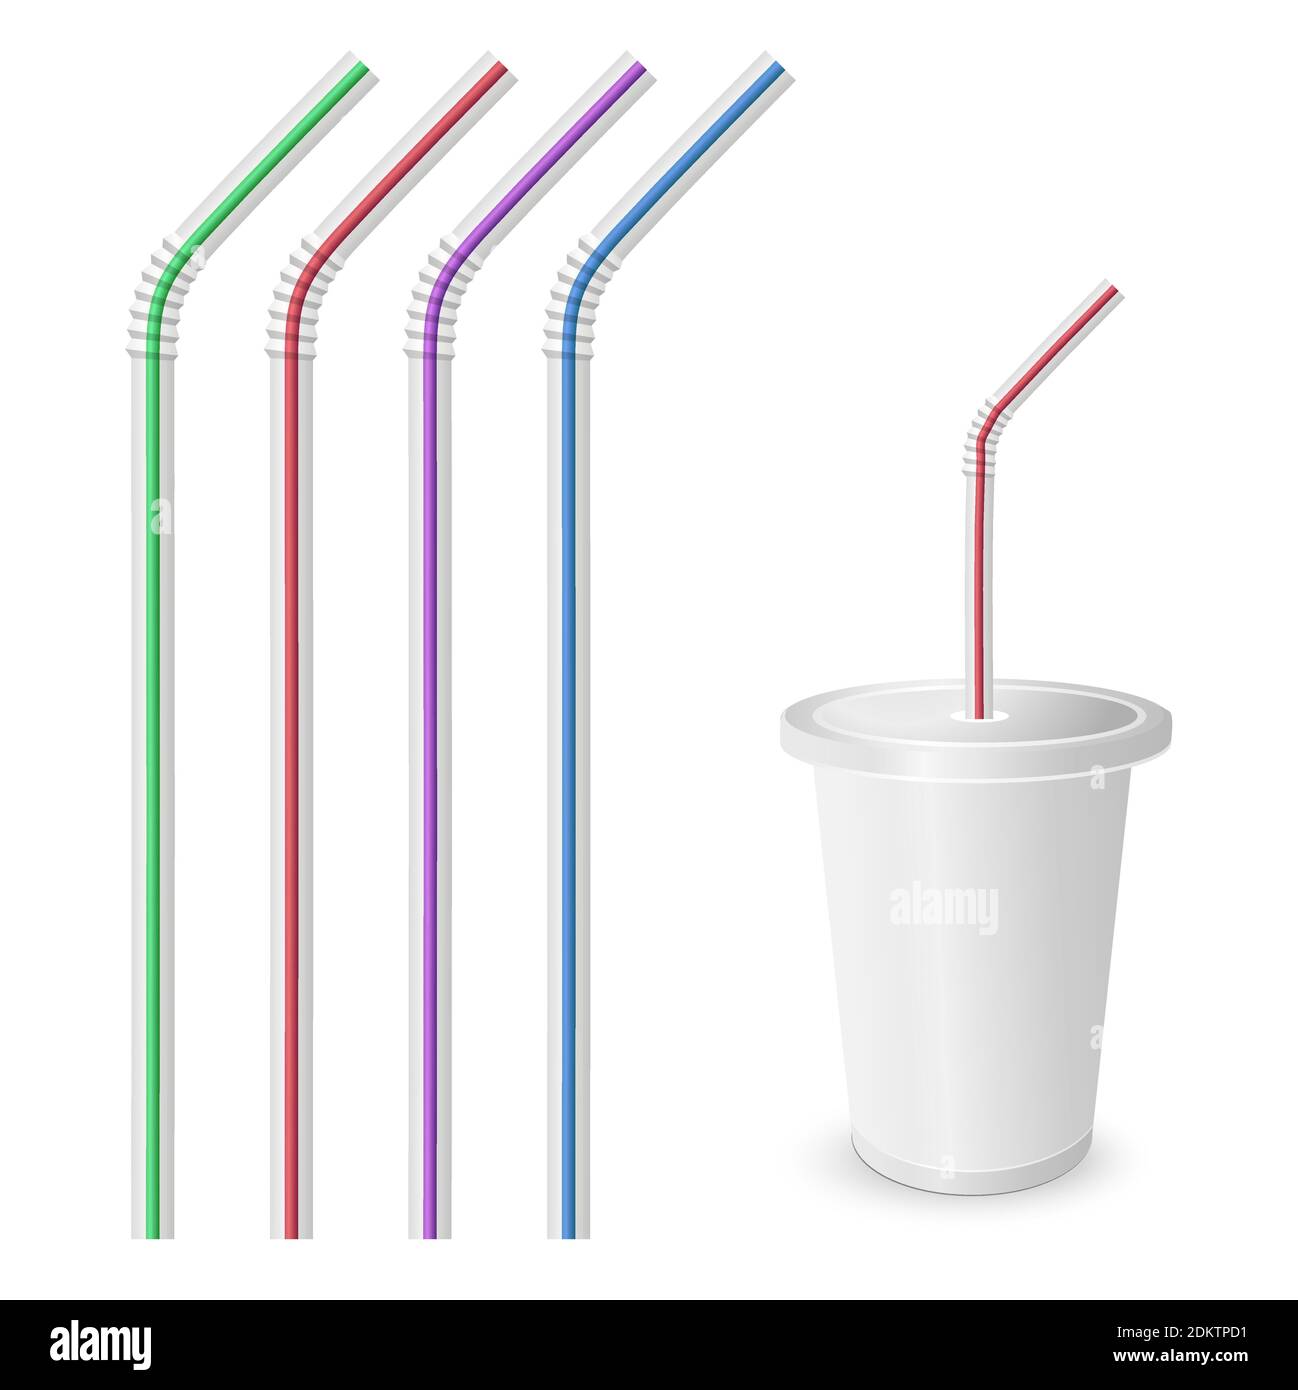 Straw for beverage. Striped and colorful straws. Drinking straws isolated on a white background. Plastic fastfood cup for beverages with straw. Stock Vector